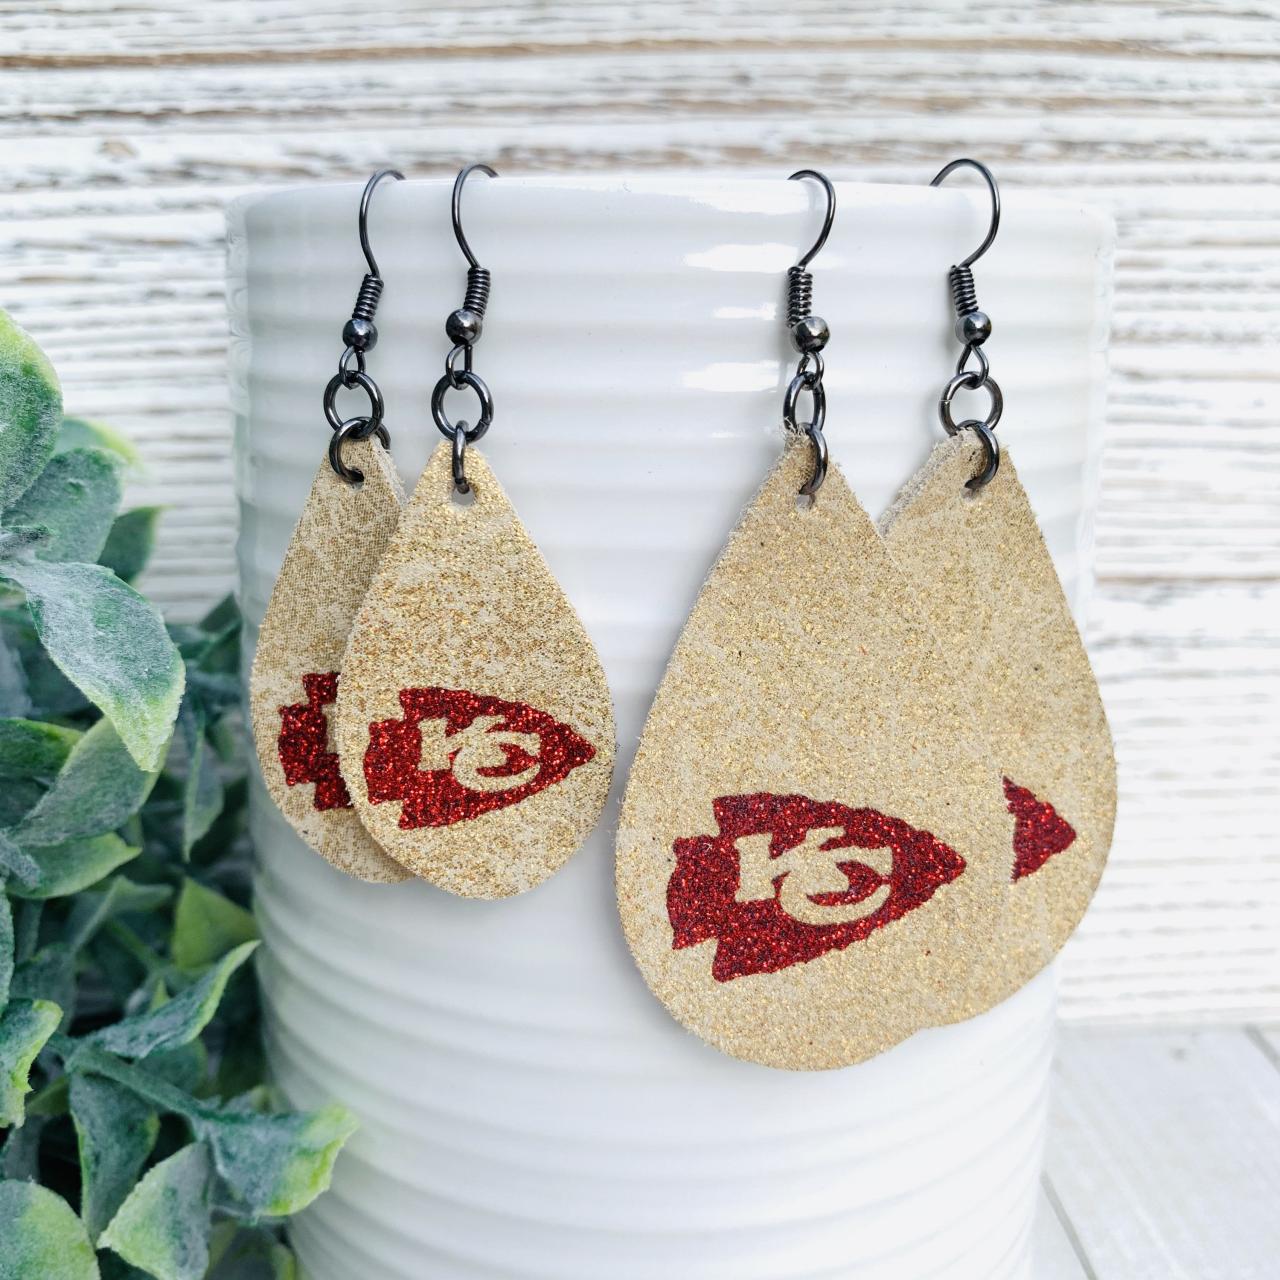 Cute Leather Earrings | KC Chiefs Leather Earrings| KC Chiefs Earrings | Chiefs Leather Earrings | Chiefs Earrings | Leather Earrings